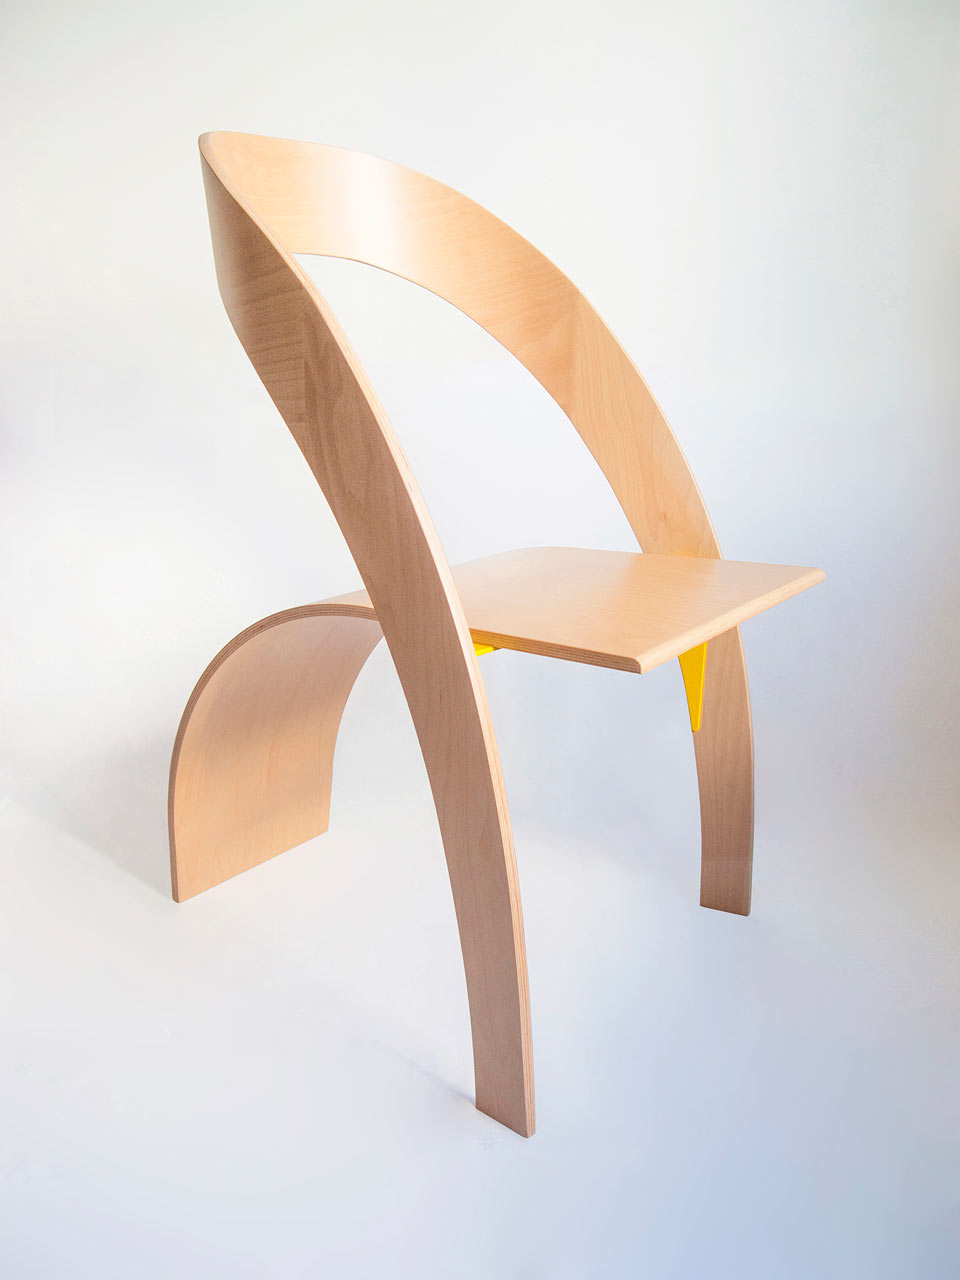 Counterpoise Chair by Kaptura de Aer